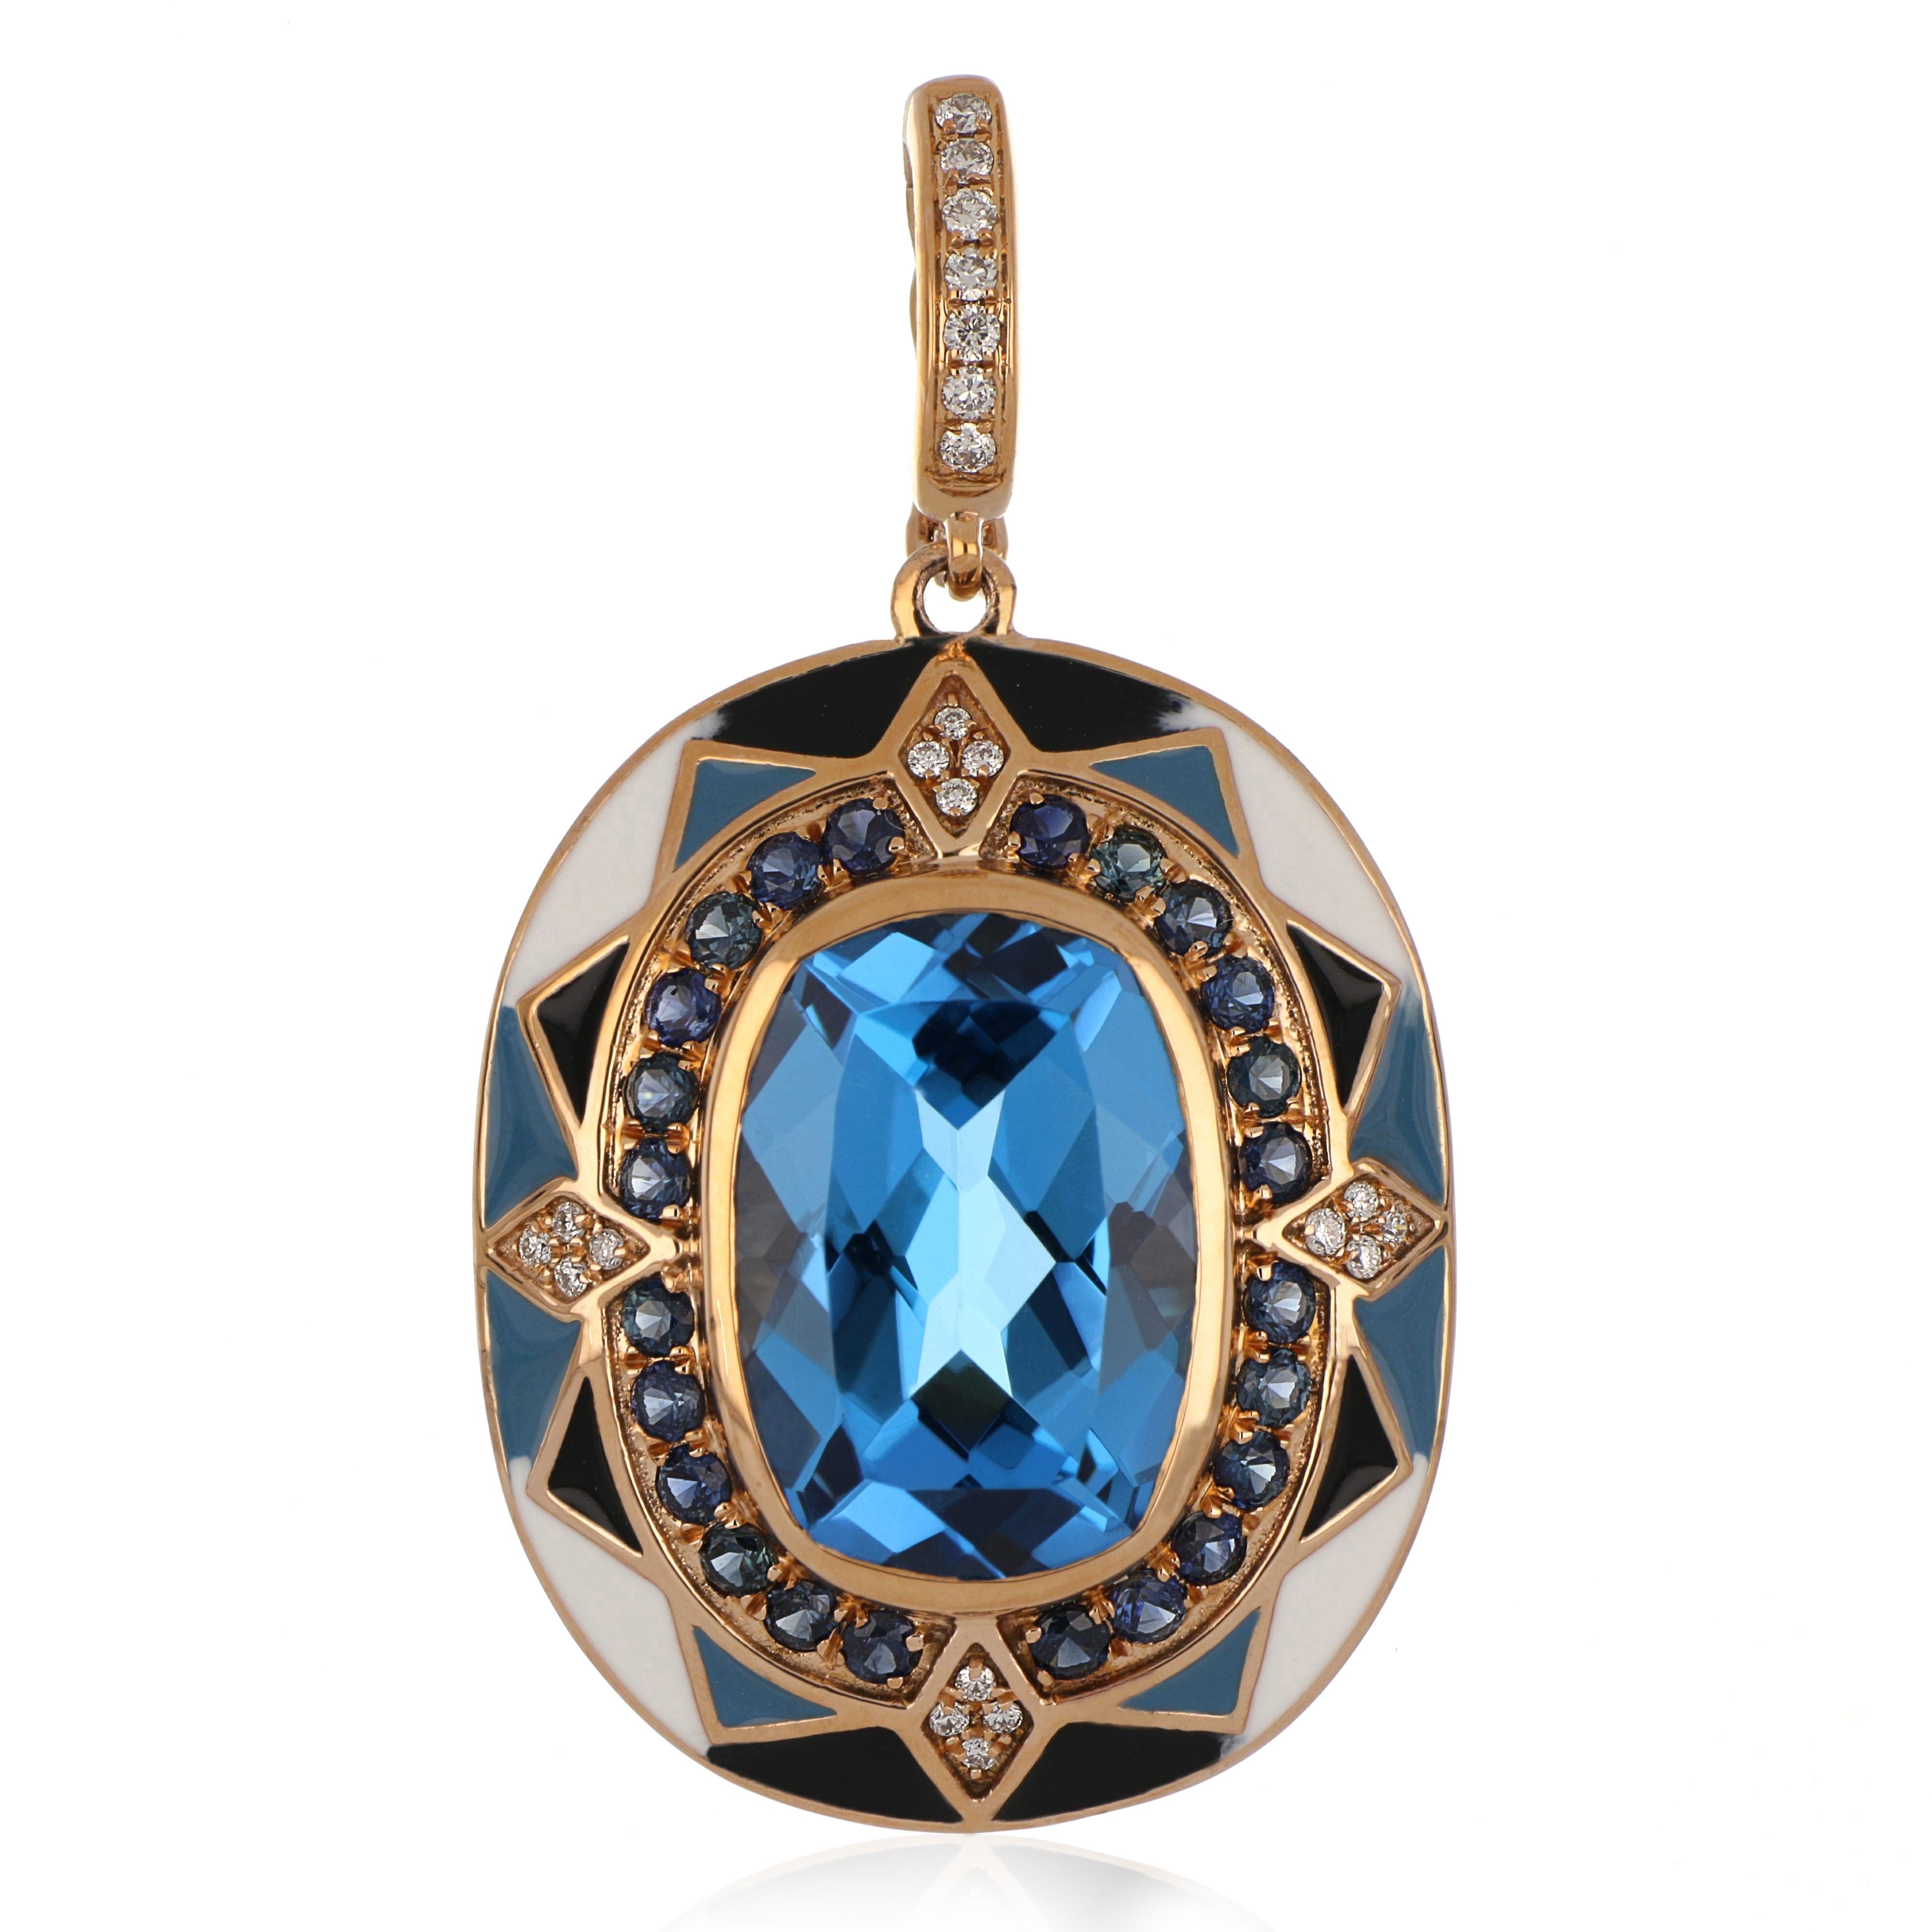 Elegant and exquisite Enamel Cocktail 14 K Pendant, center set with 6.18 Cts. Cushion Cut vibrant Swiss Blue Topaz, surrounded by Blue Sapphire Halo 0.50 Cts. accented with Diamonds, weighing approx. 0.09 Cts. Beautifully Hand crafted in 14 Karat